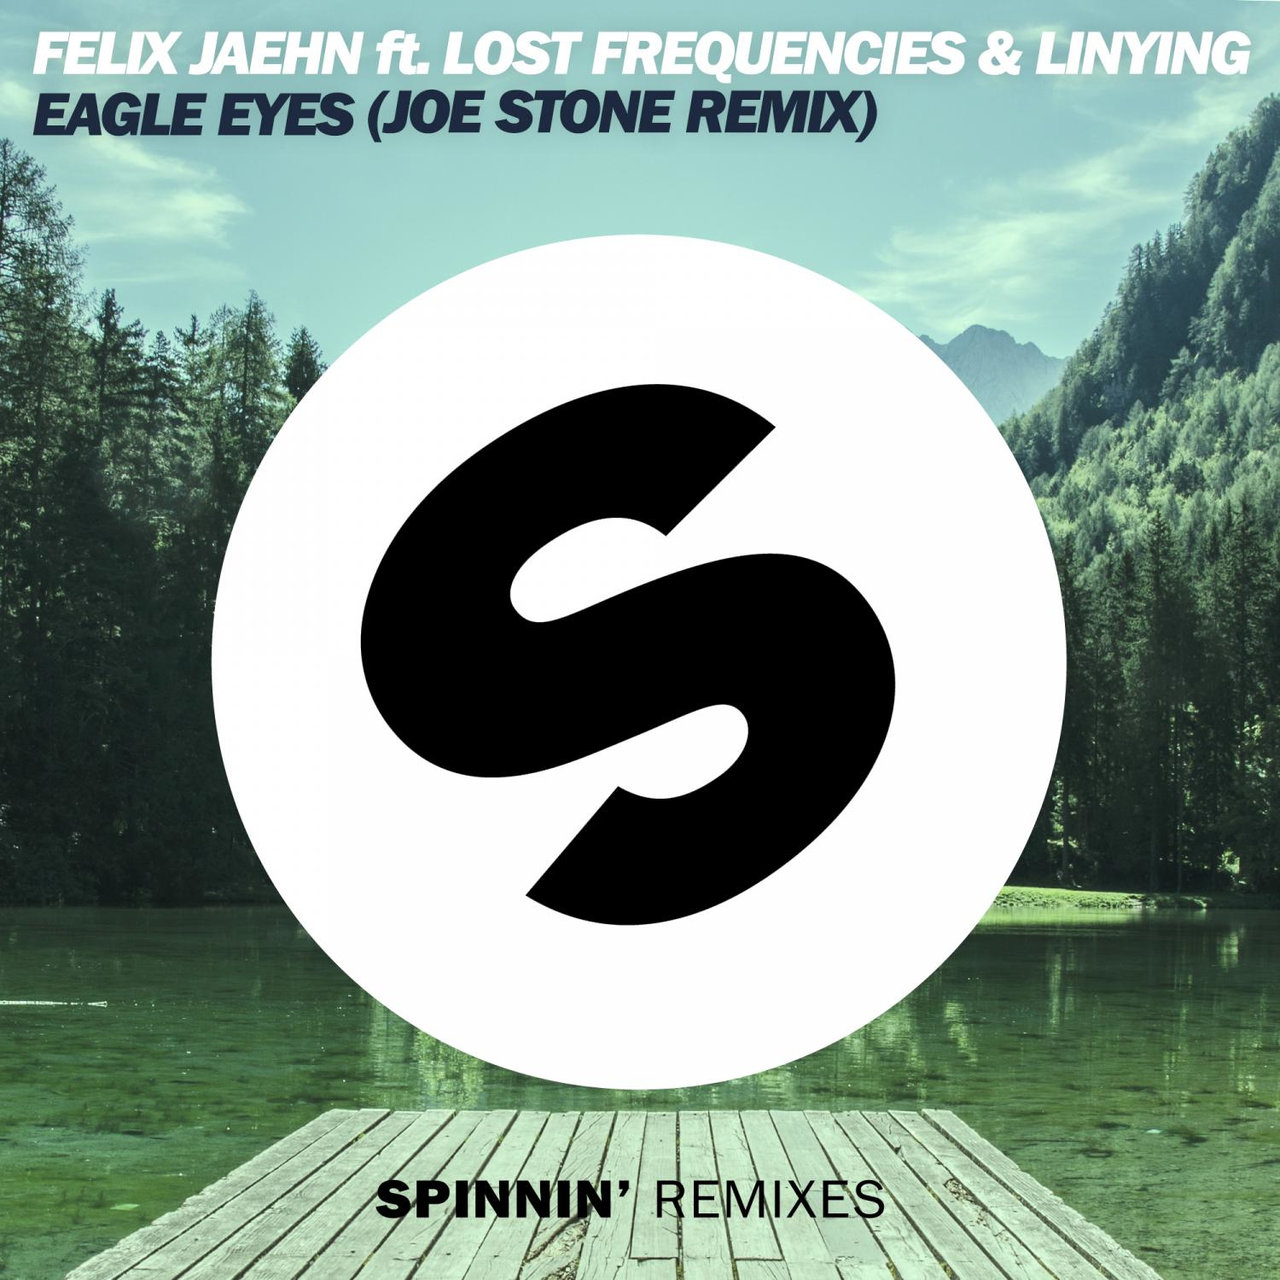 Felix Jaehn ft. featuring Lost Frequencies & Linying Eagle Eyes (Joe Stone Remix) cover artwork